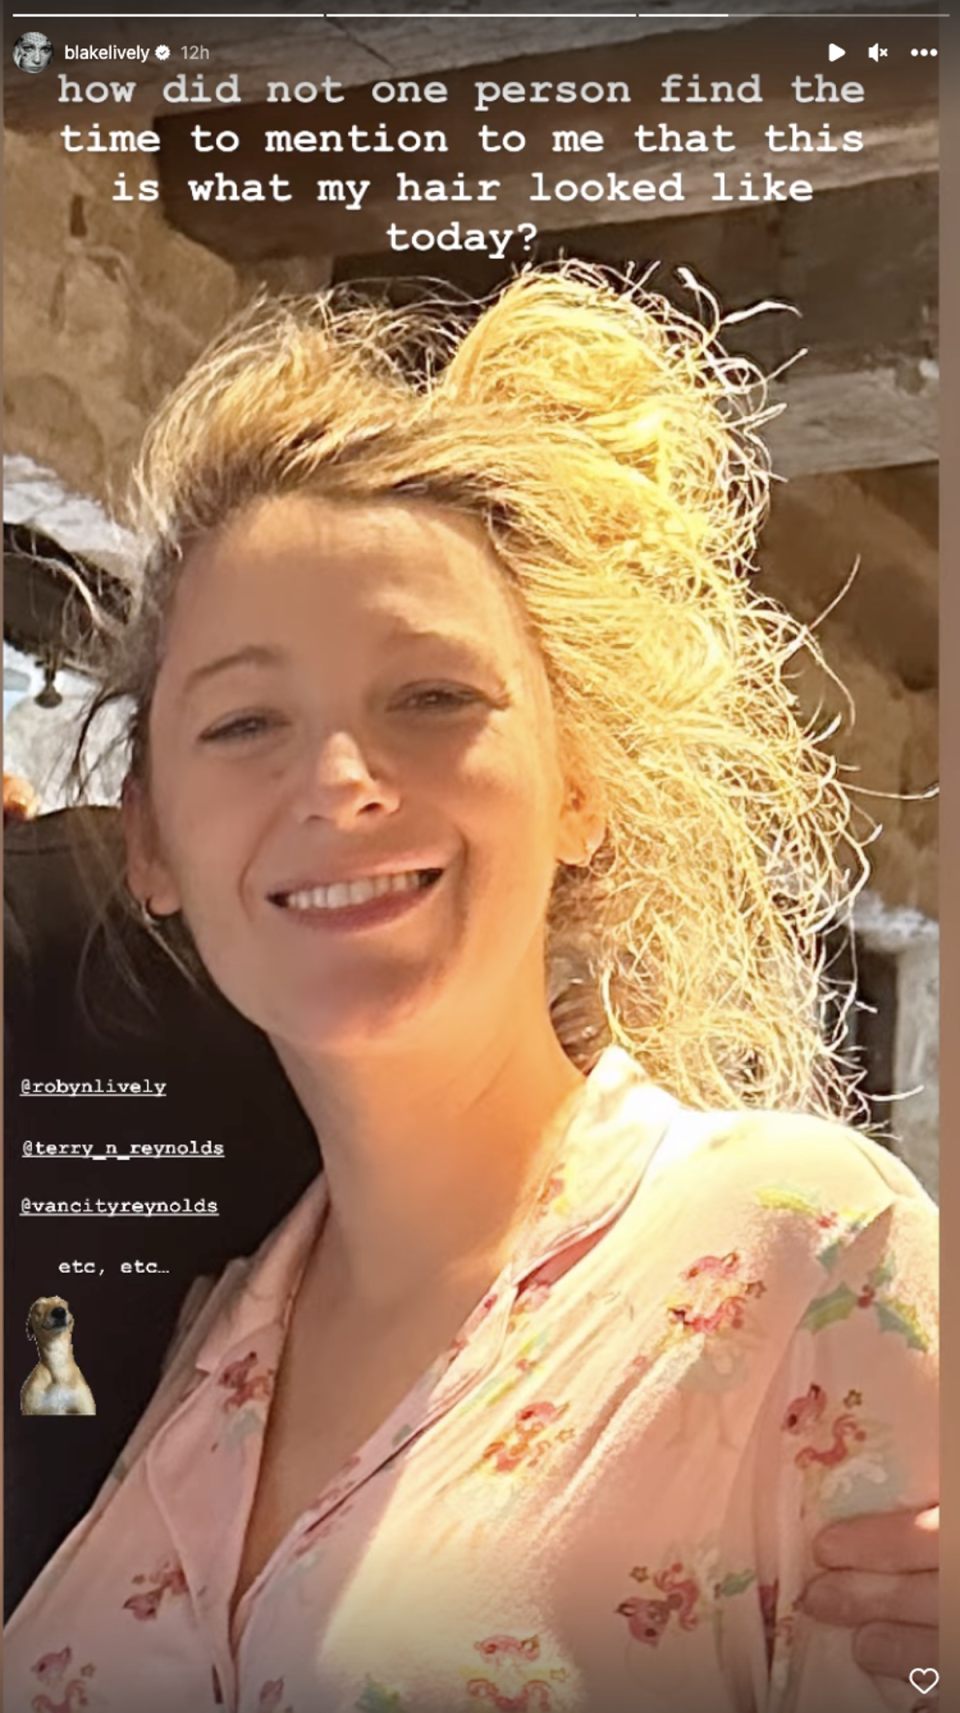 Blake Lively reveals bad hair day in candid snap (Instagram / Blake Lively)